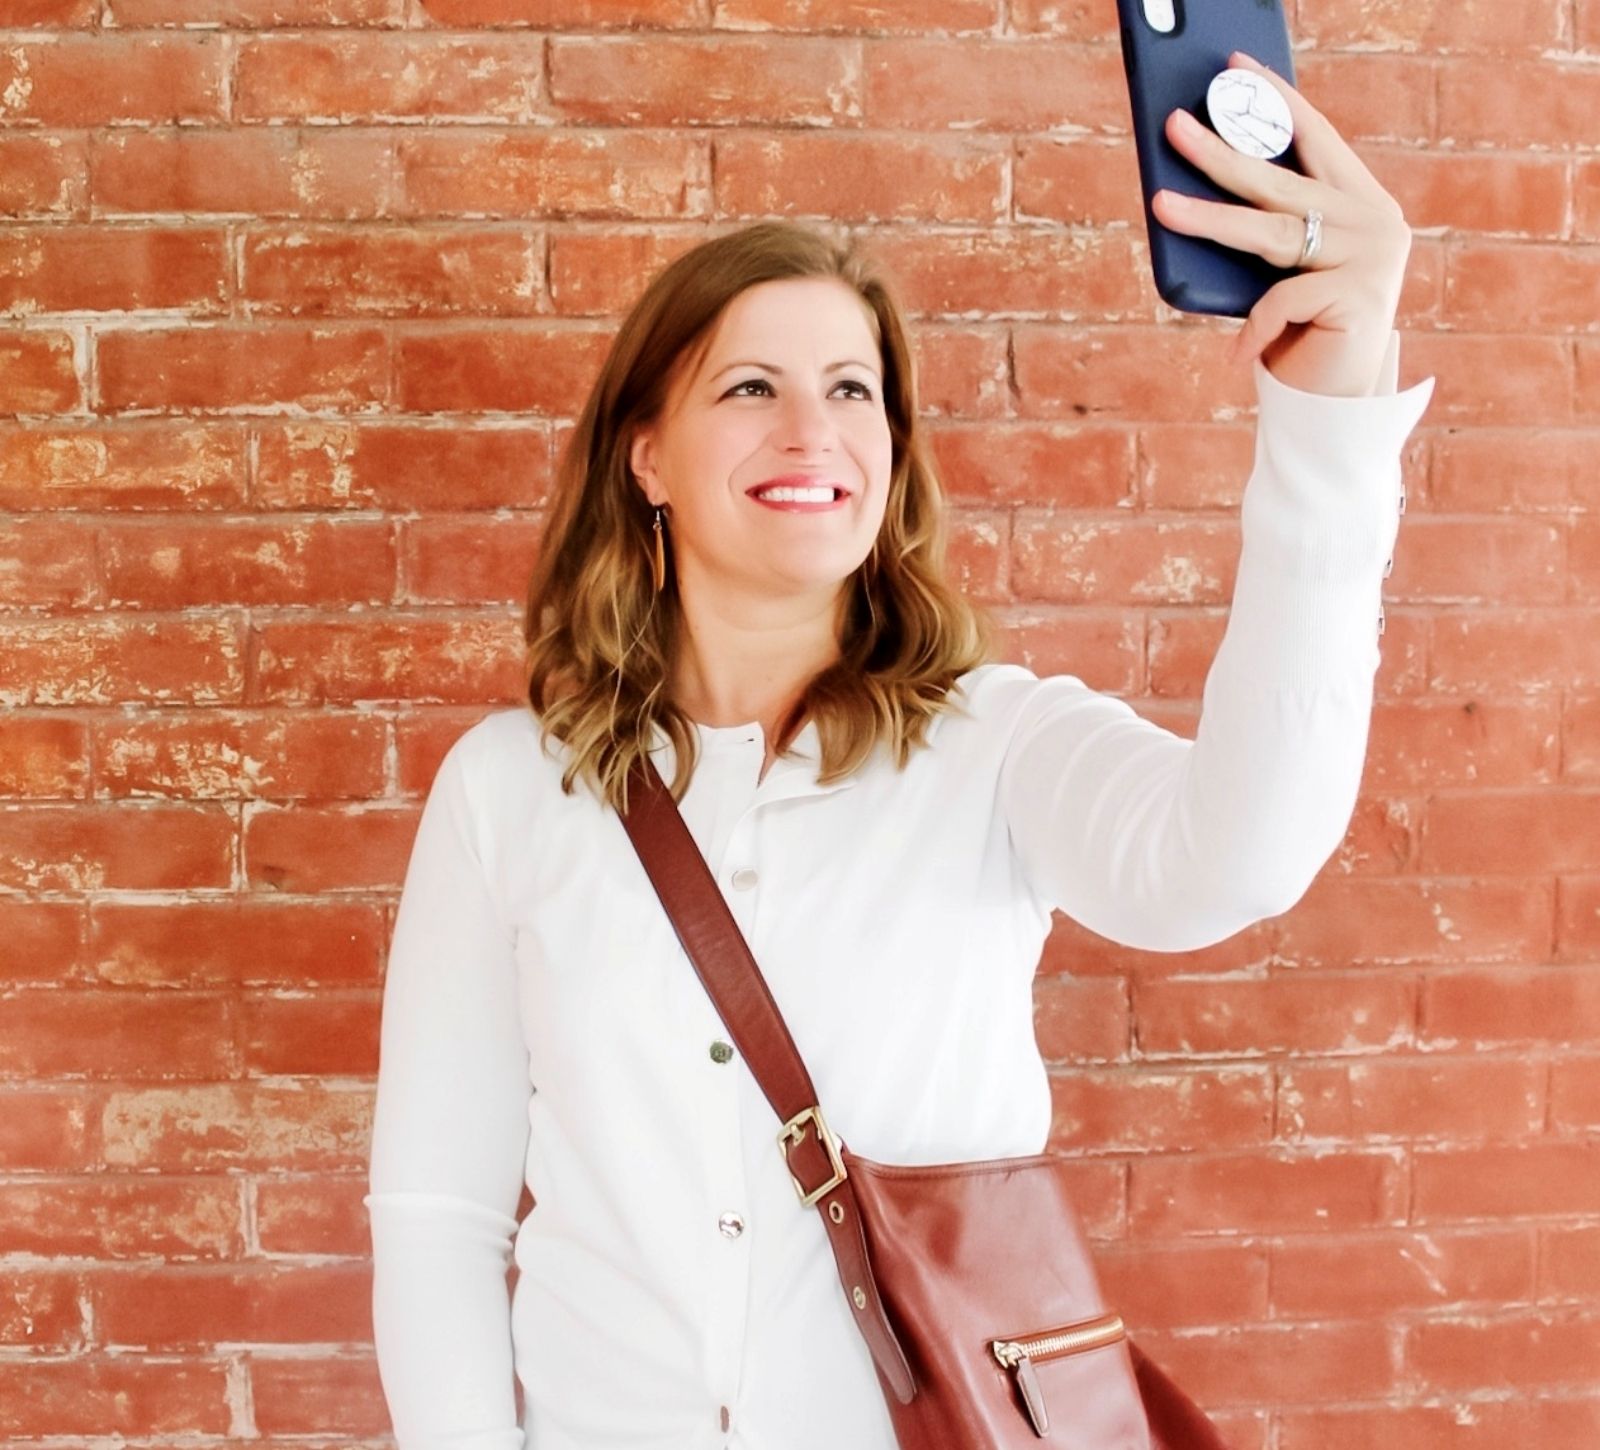 Kitchen Table CEOs Blog - 10 Ways to Take Pictures of Yourself for Social media - Tracy Smith, Founder of Kitchen Table CEOs taking a selfie and demonstrating how to take a picture of yourself for social media.